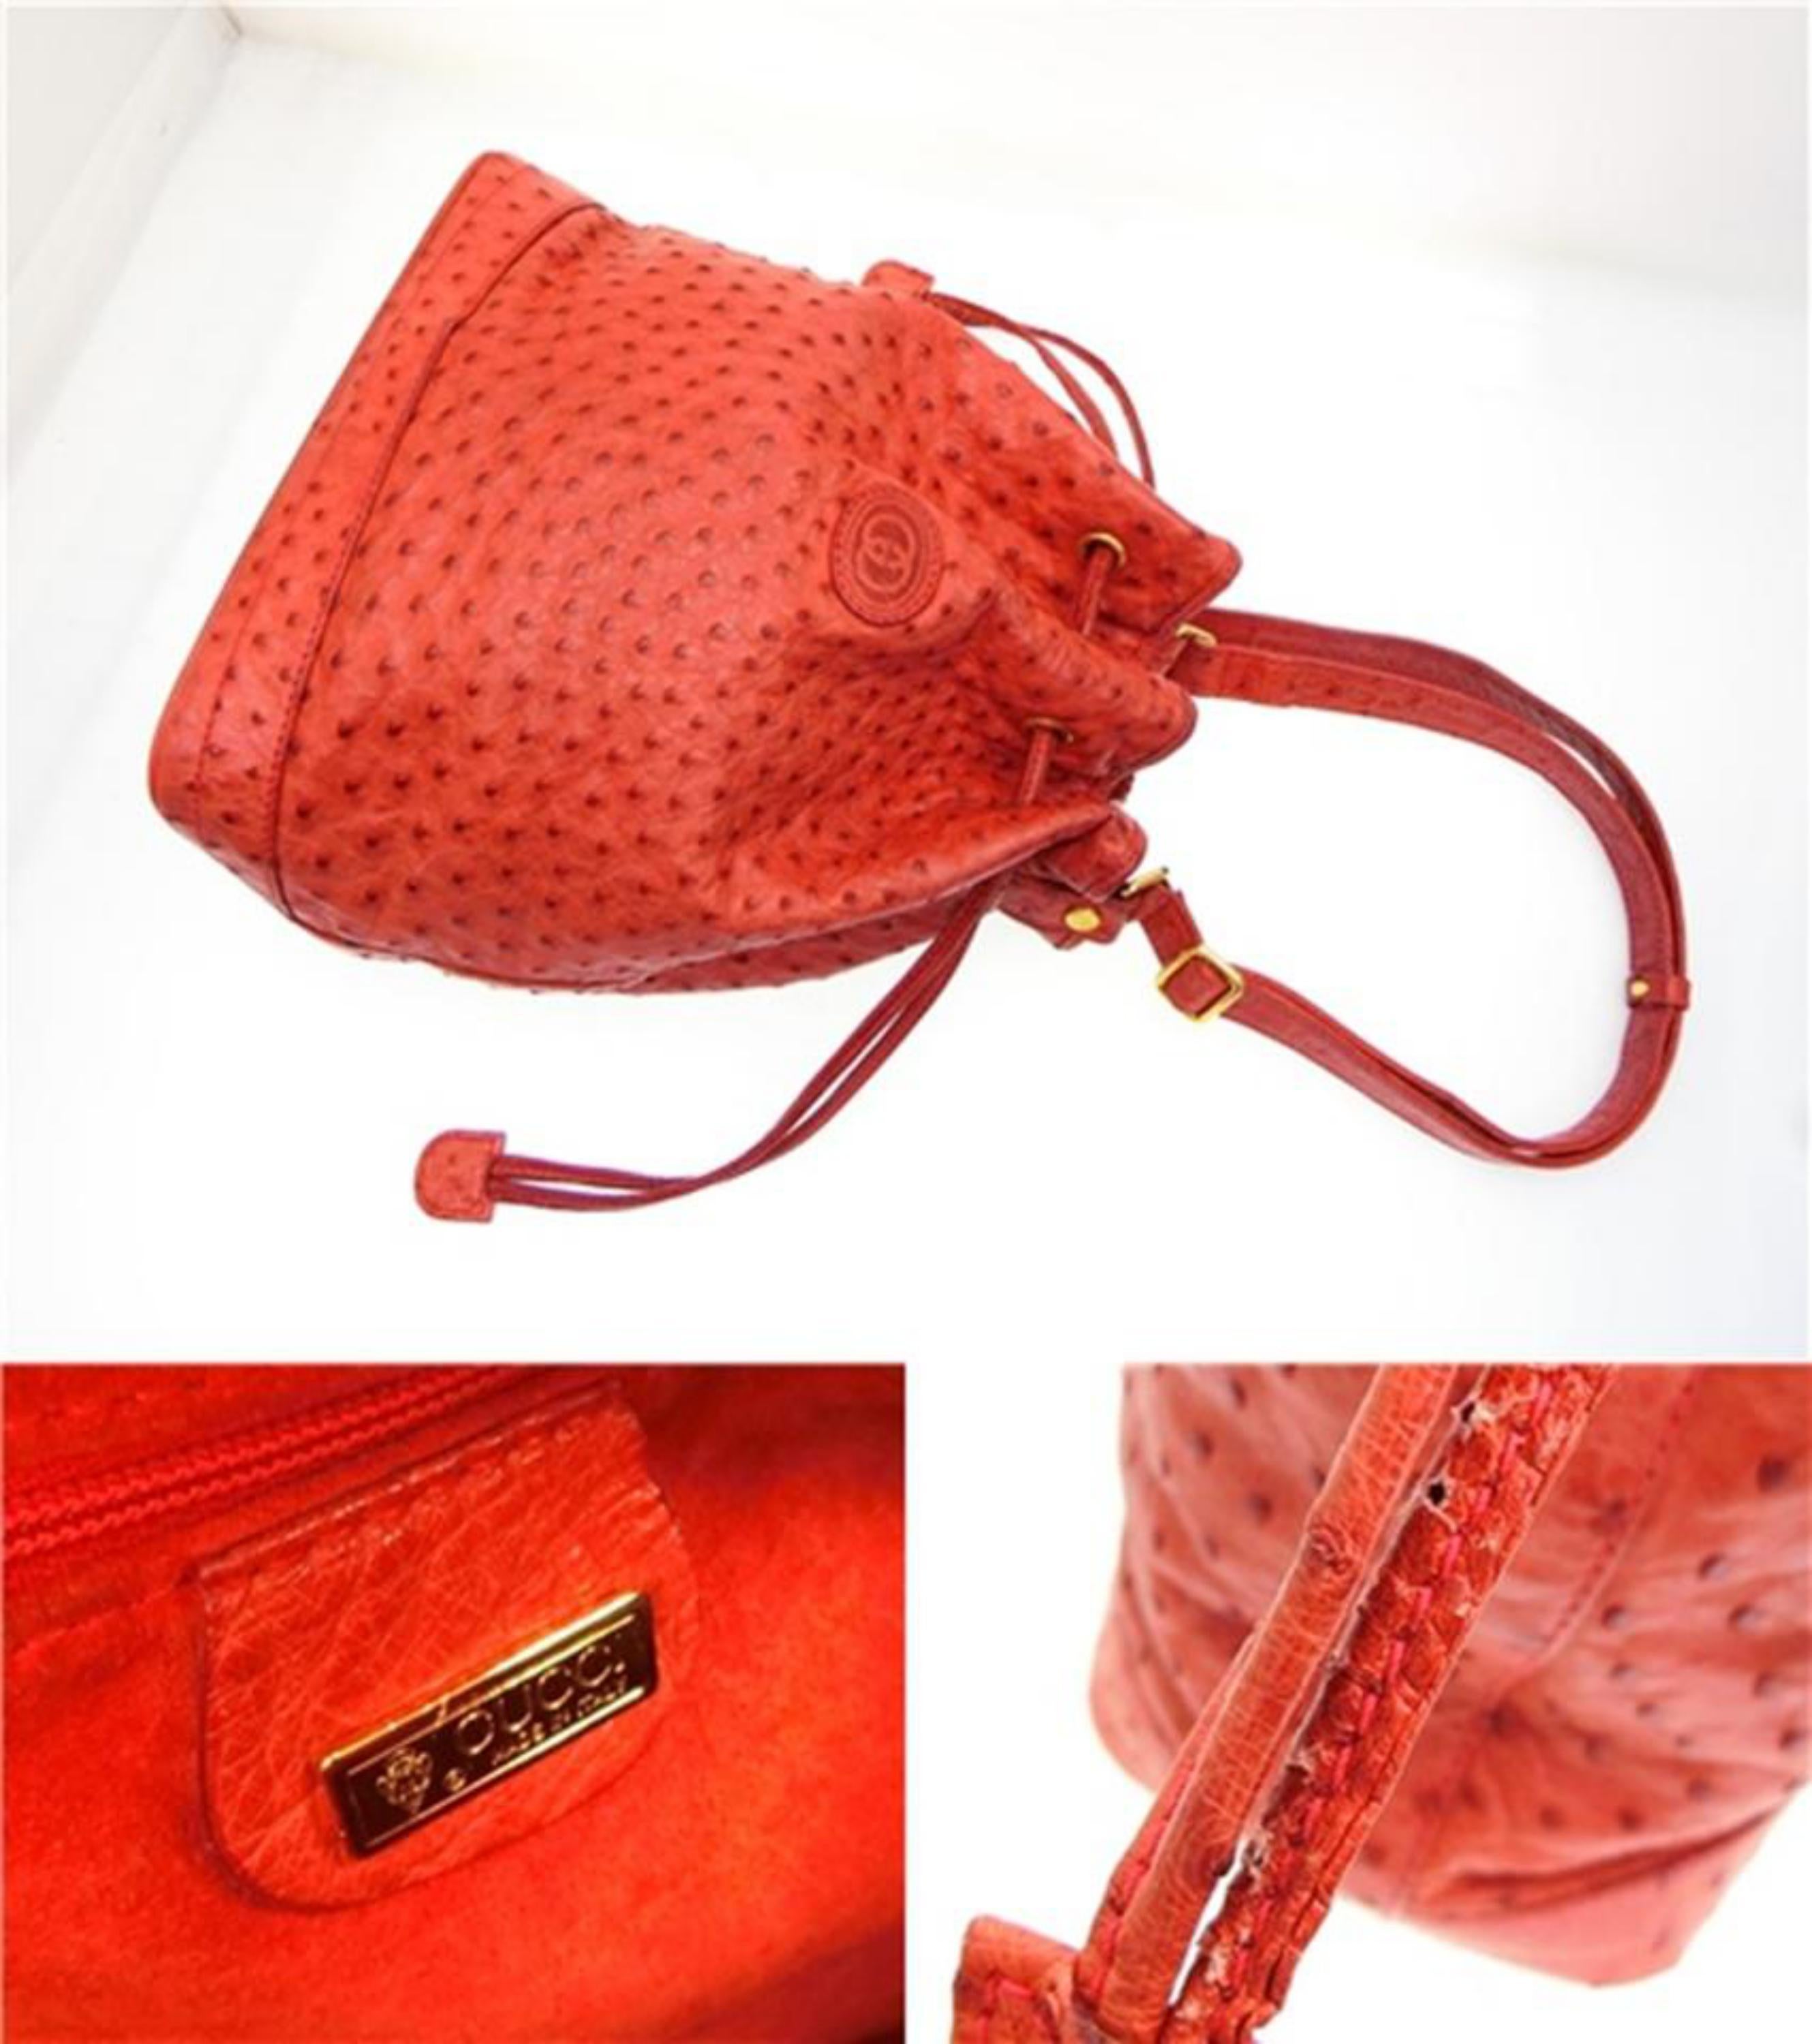 Gucci Drawstring Bucket Hobo 227959 Red Ostrich Leather Shoulder Bag In Good Condition For Sale In Forest Hills, NY